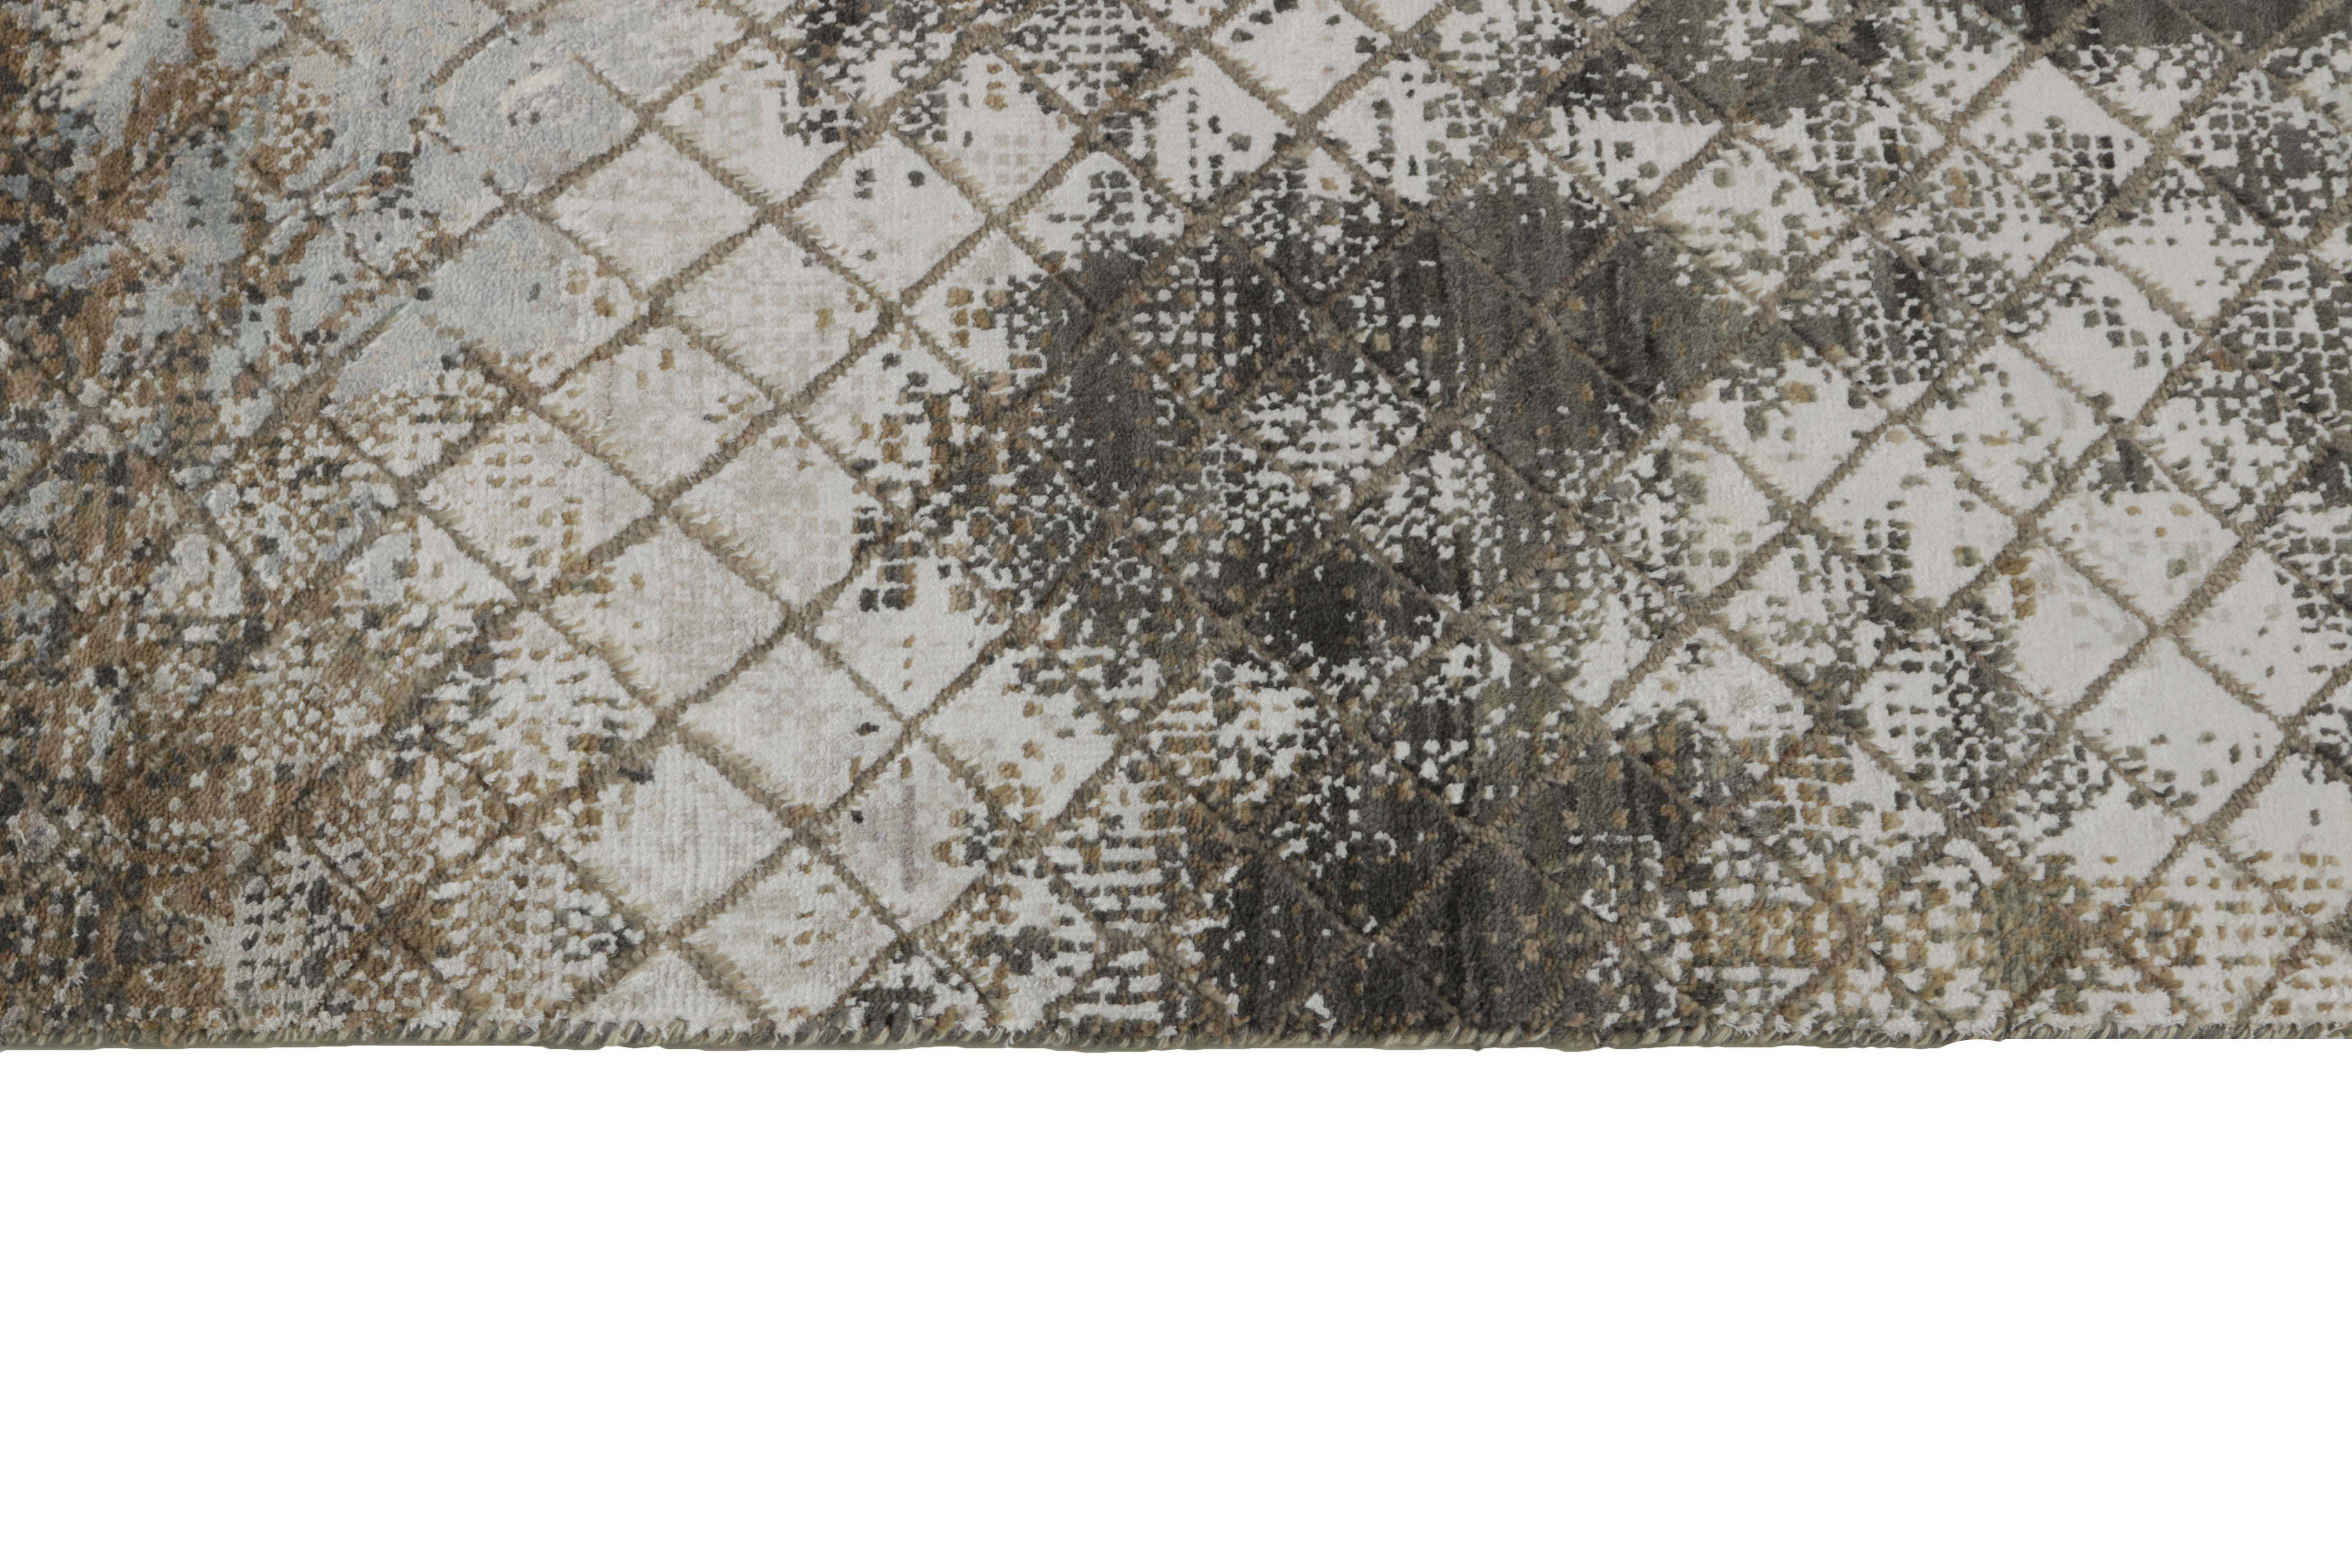 Large area rug with abstract floral design in grey and beige